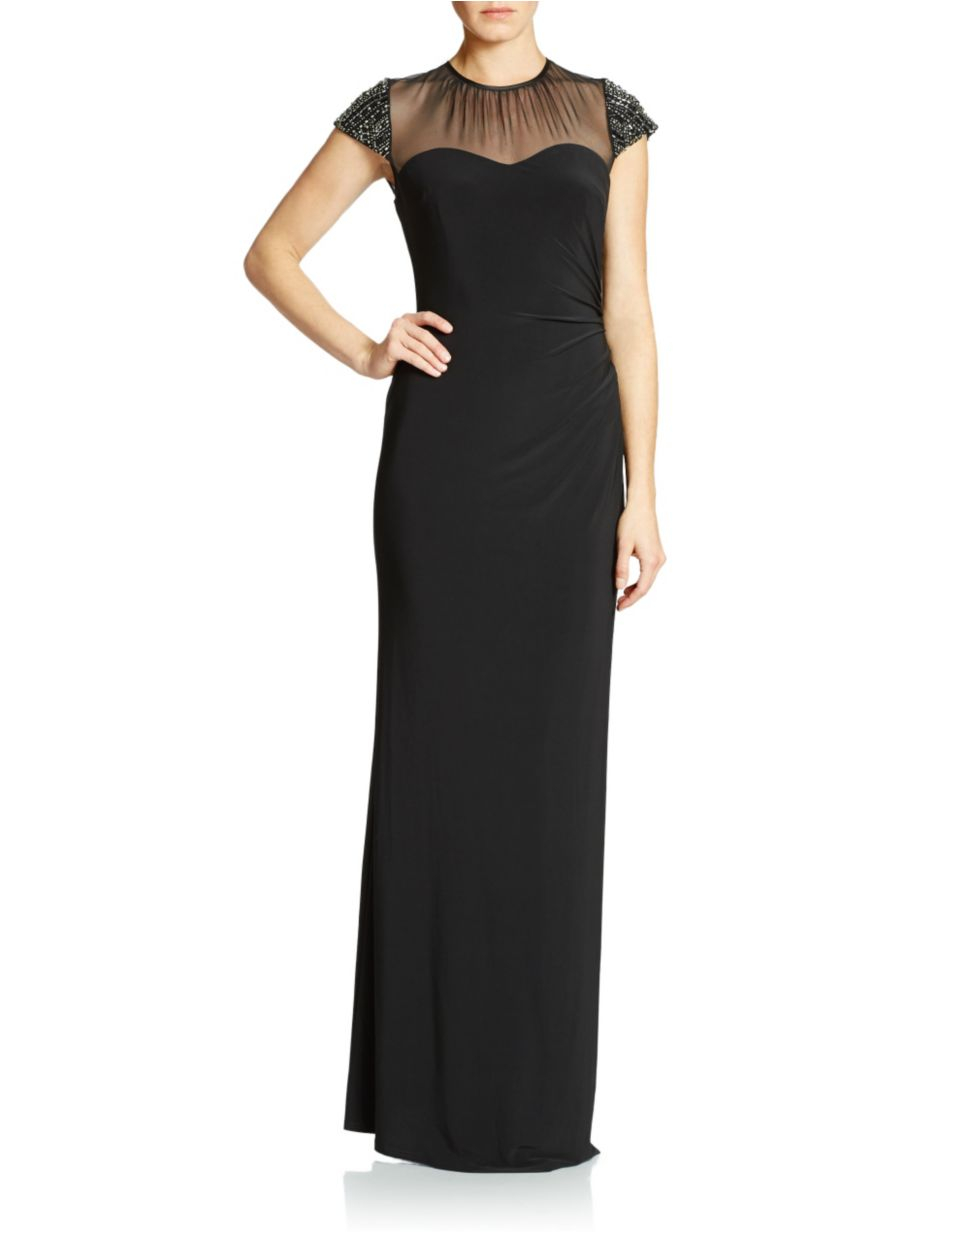 Vince camuto Embellished Cap Sleeve Illusion Neckline Gown in Black | Lyst